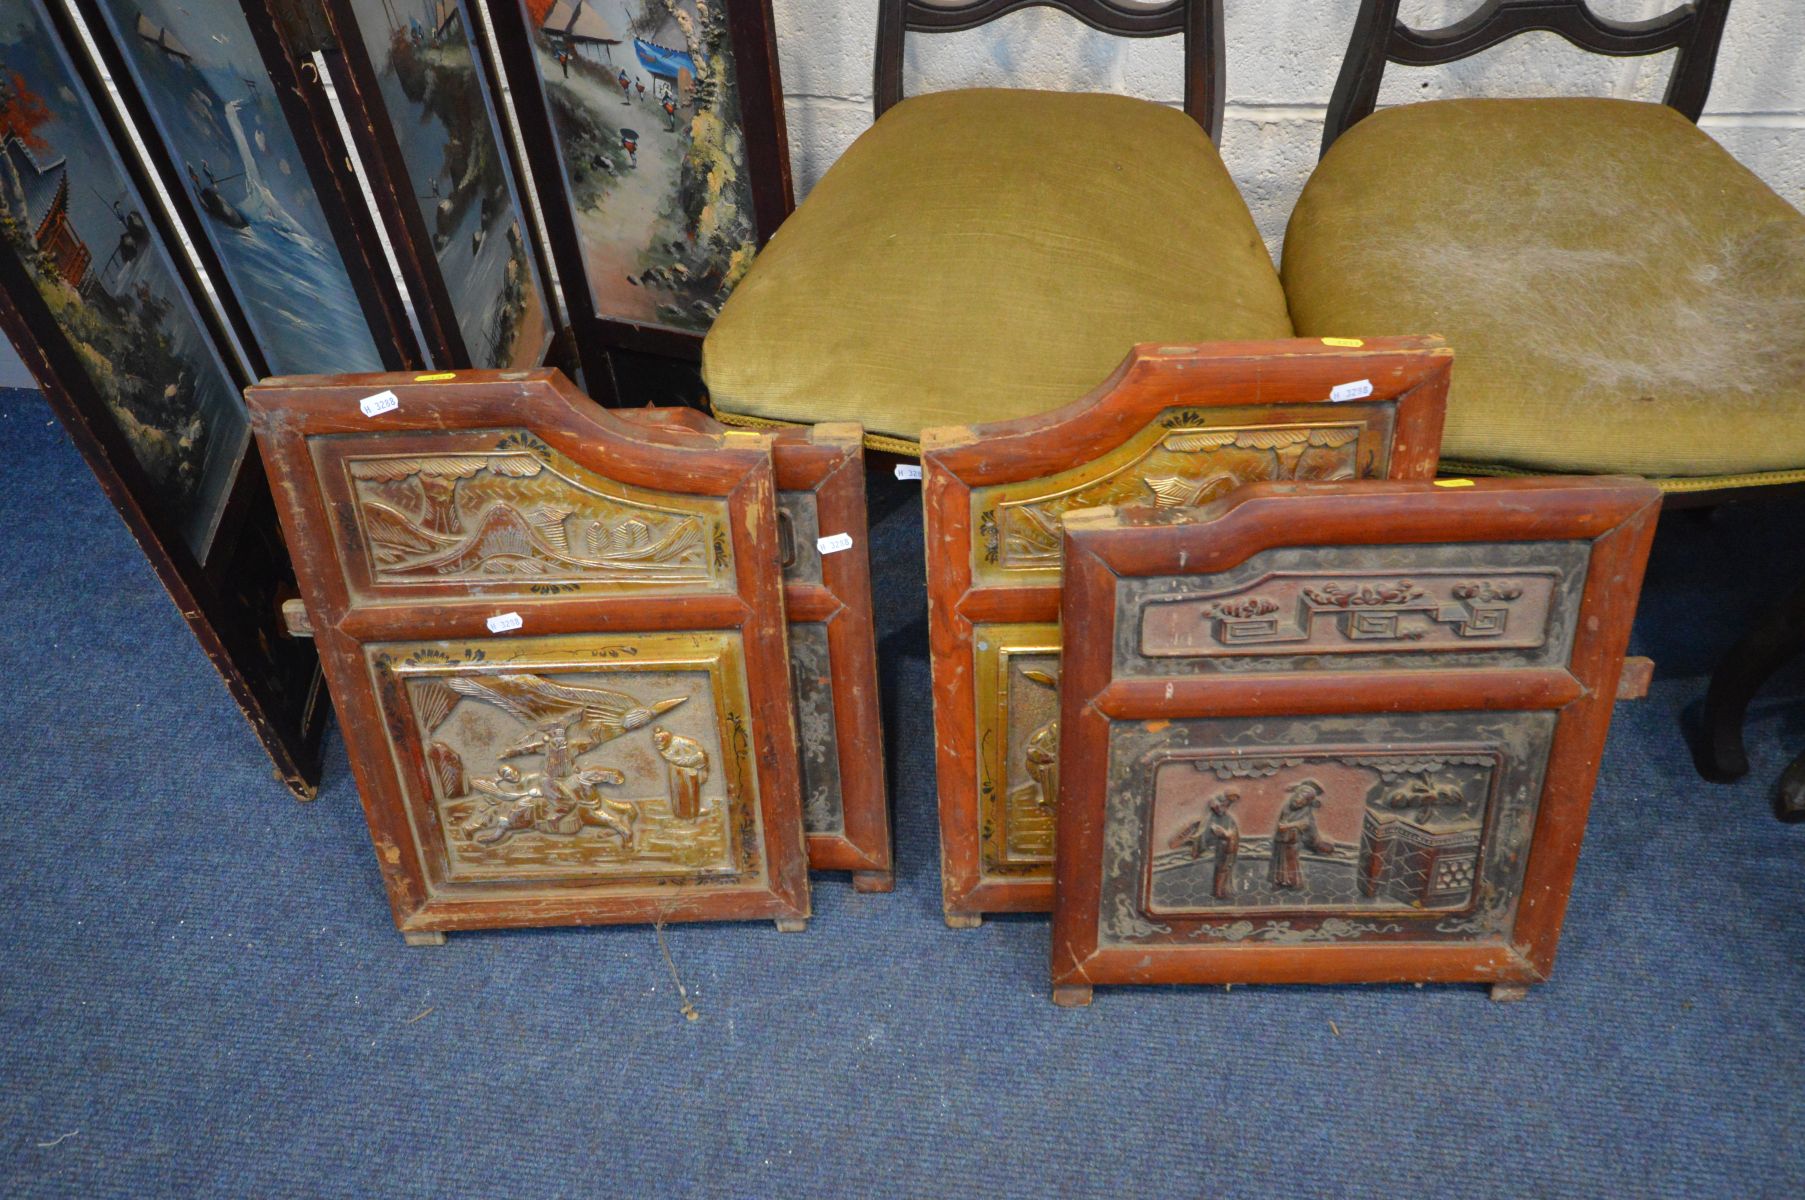 A QUANTITY OF OCCASSIONAL FURNITURE AND A COLLECTION OF CHAIRS to include an oriental folding - Image 3 of 3